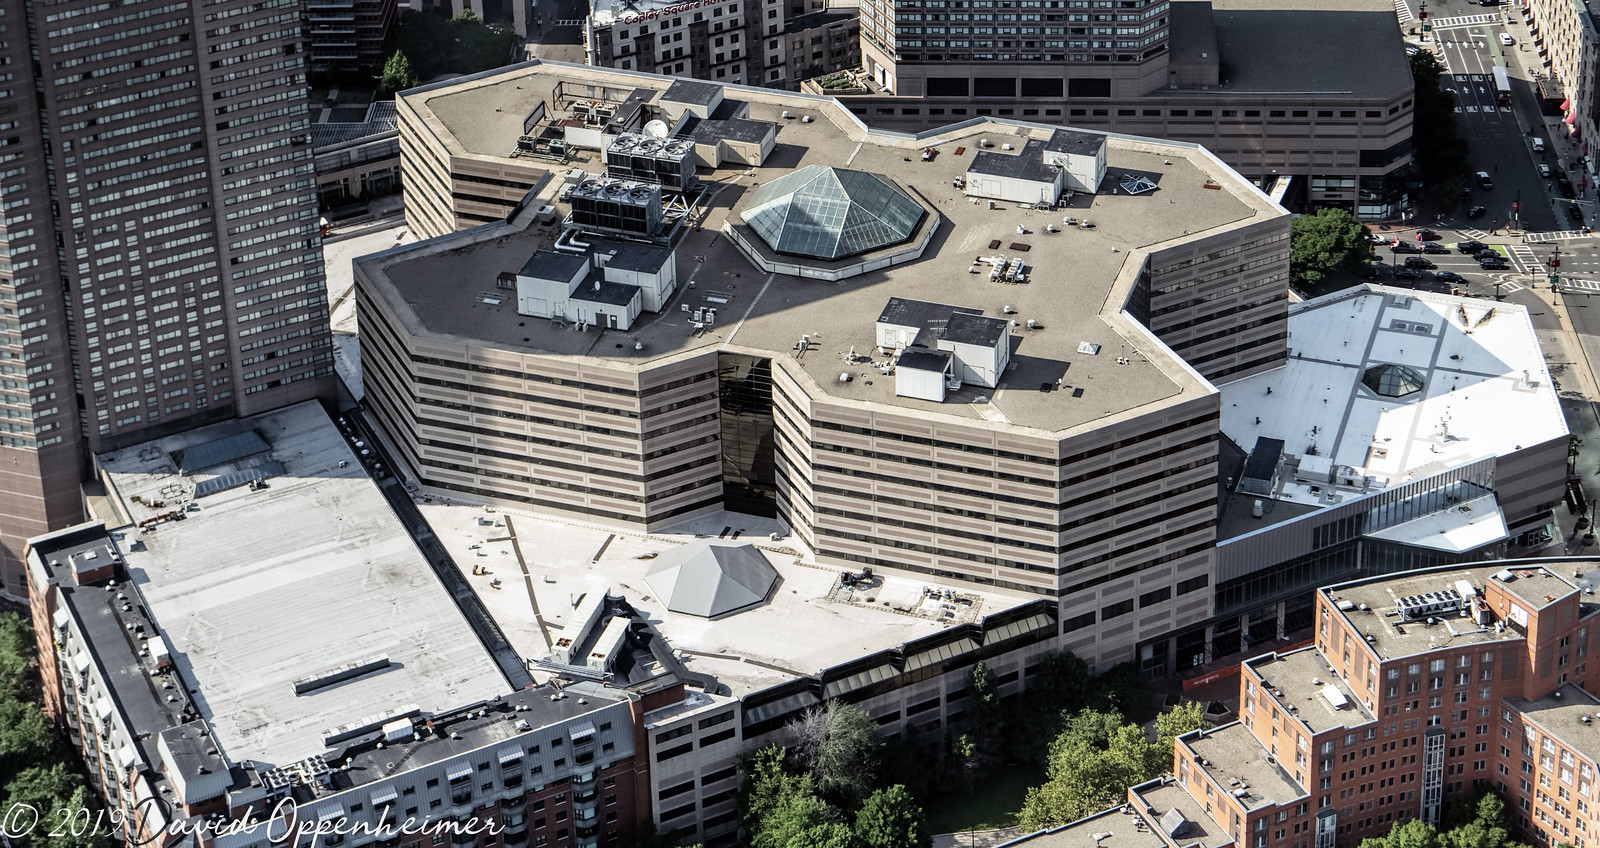 Copley Place Mall in Boston Aerial, Copley Place mall at 10…